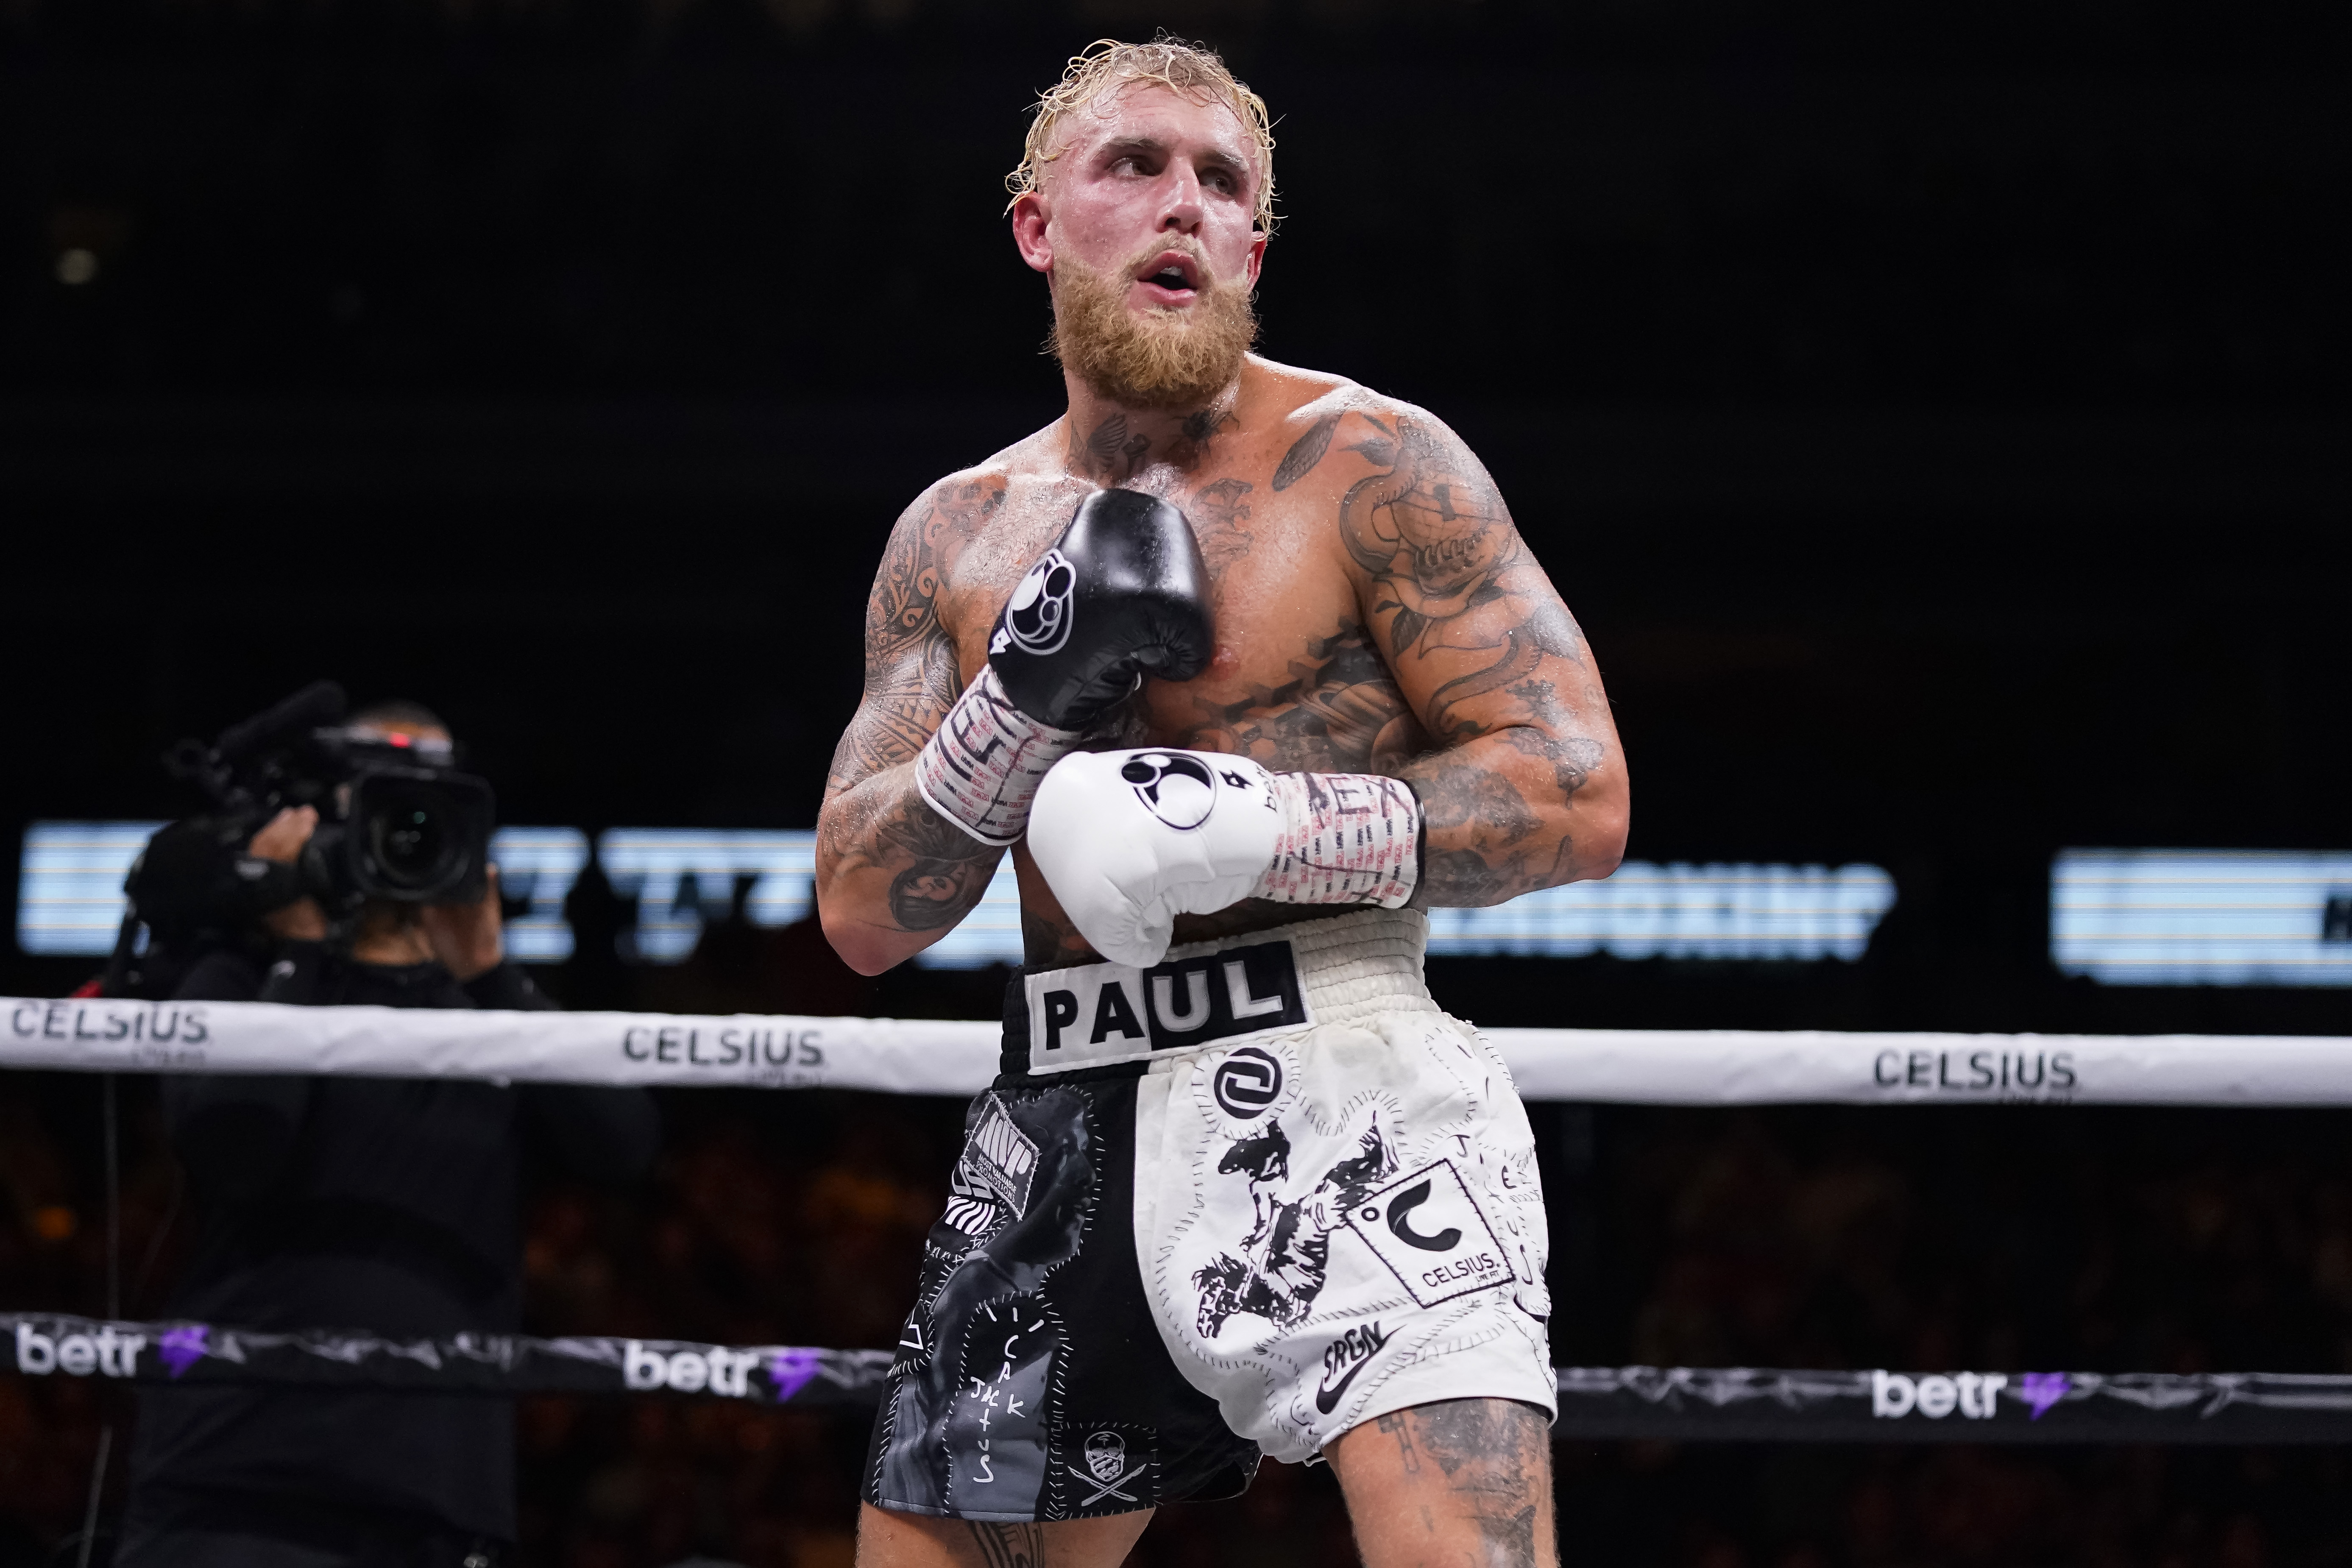 Jake Paul faces Mike Tyson on July 20